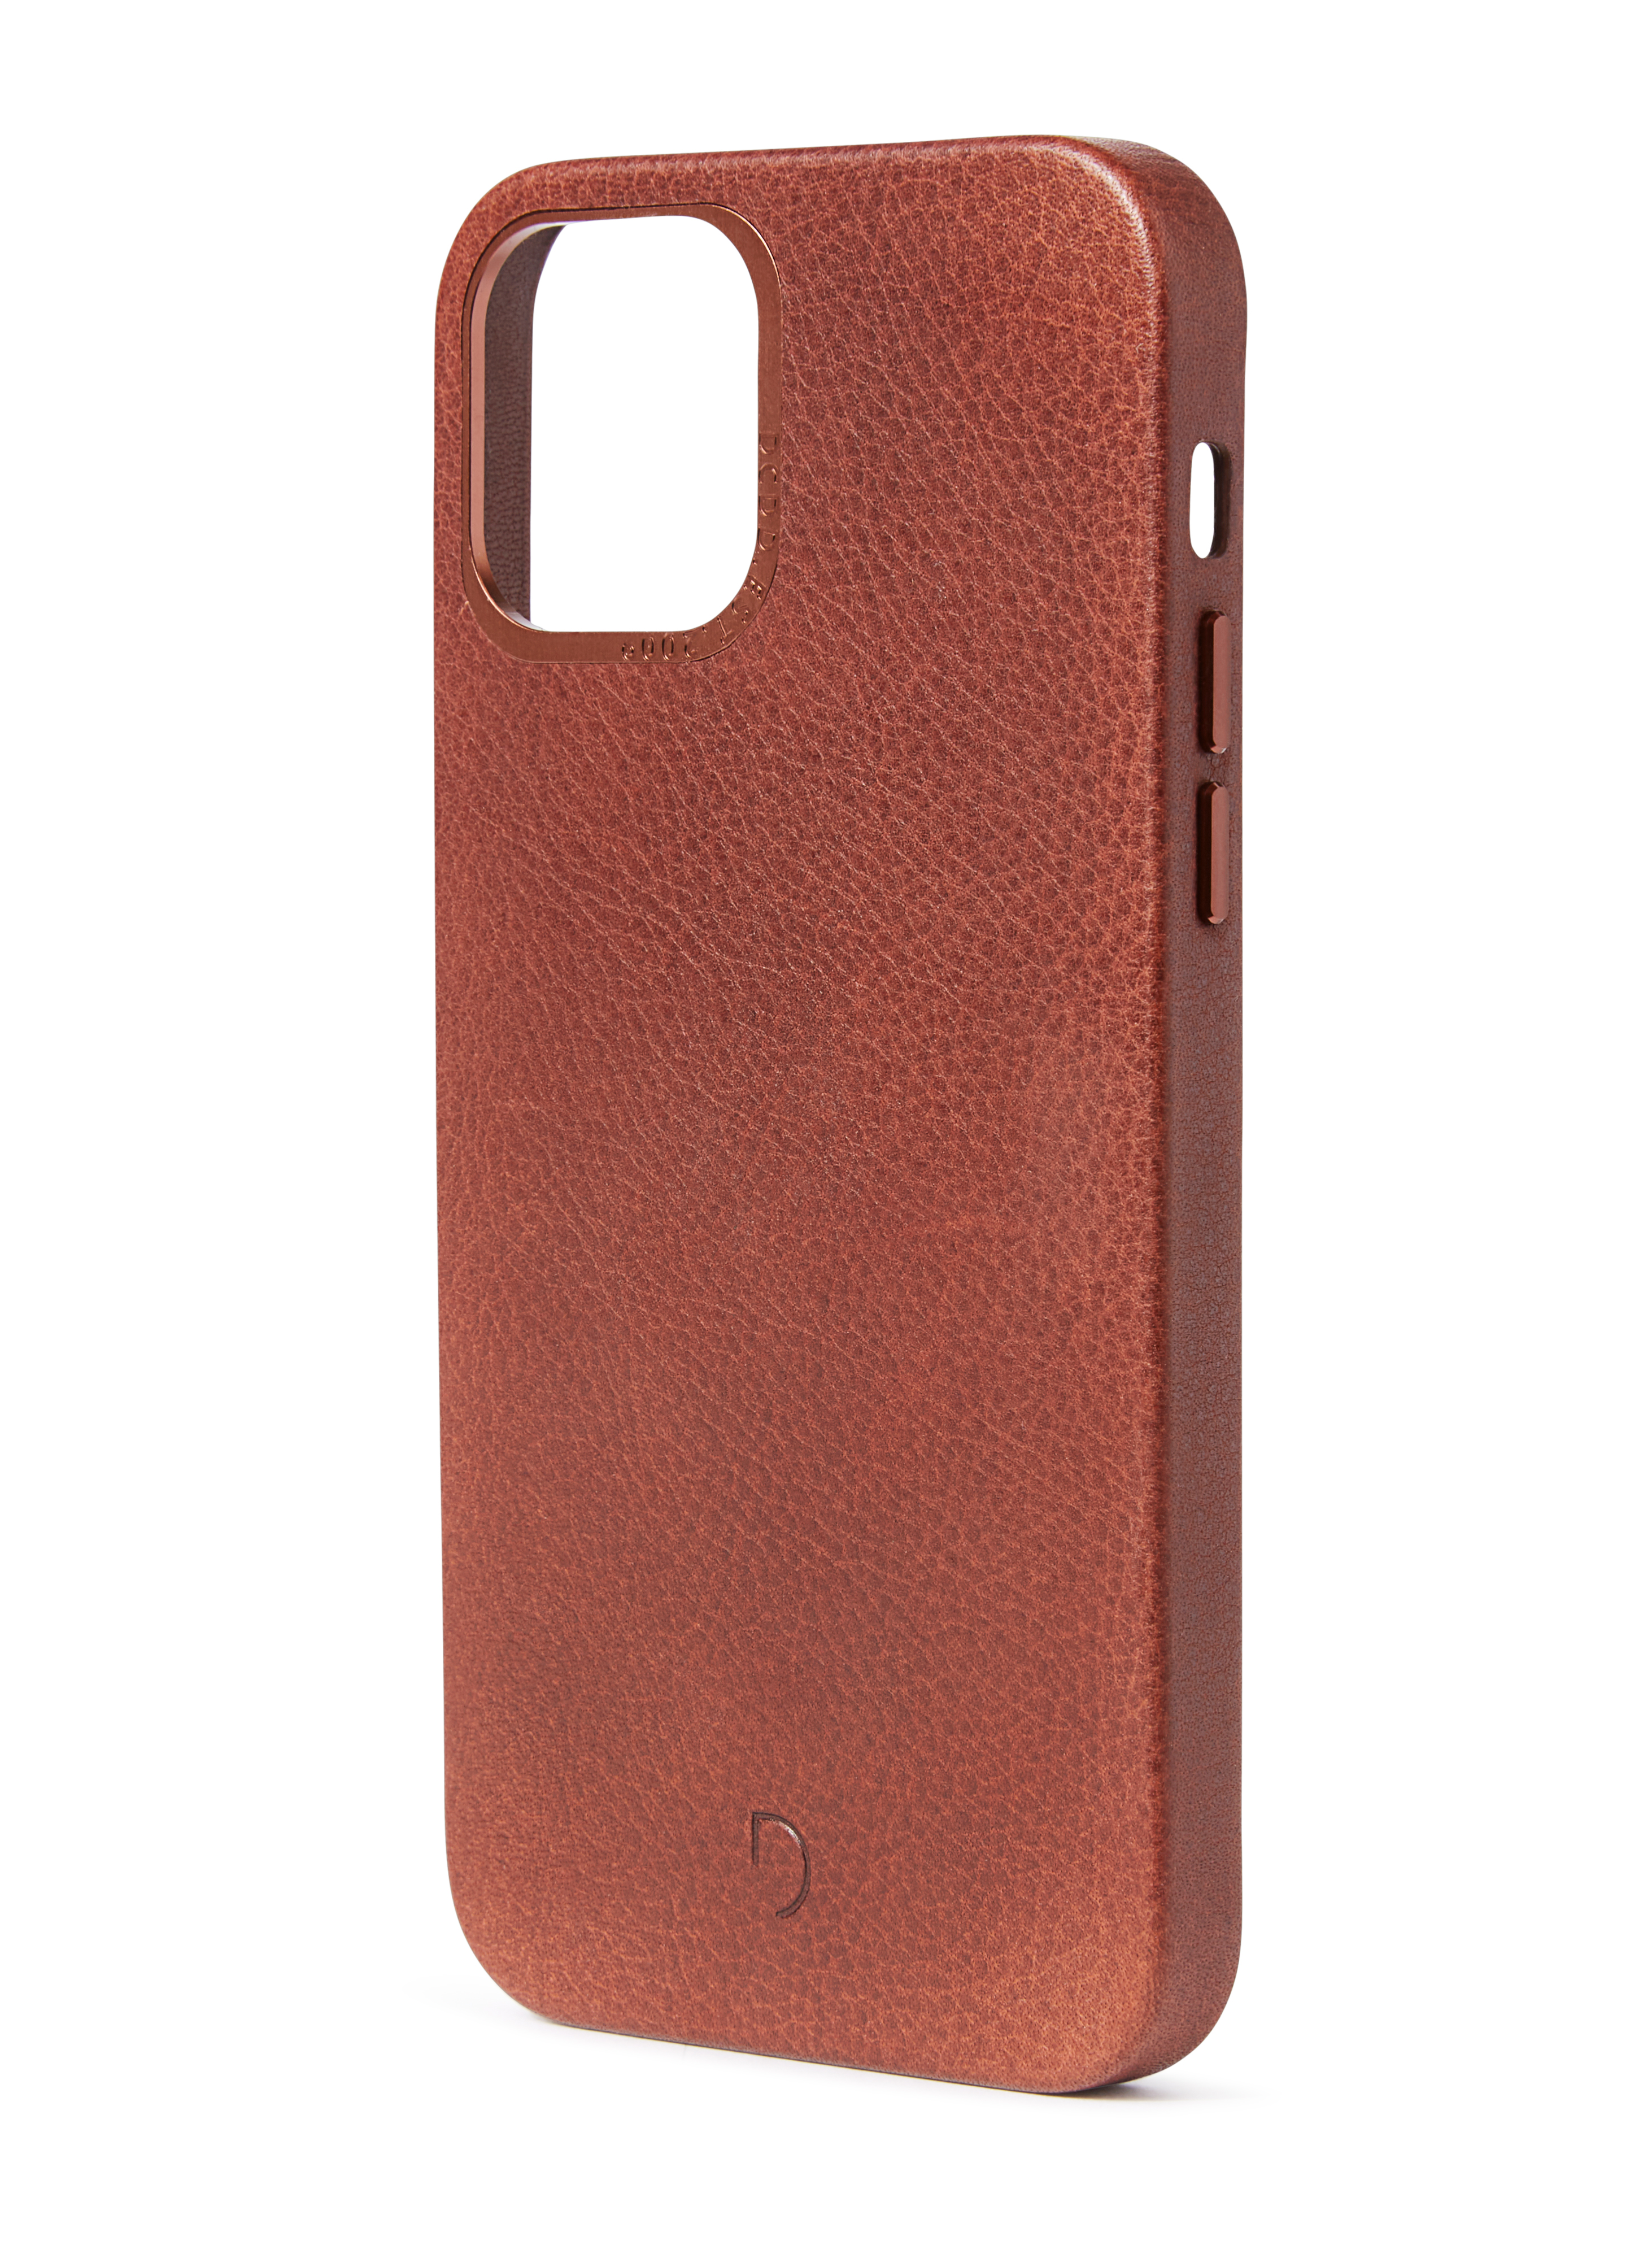 iPhone 12/12 Pro, leather case magsafe, cinnamon brown